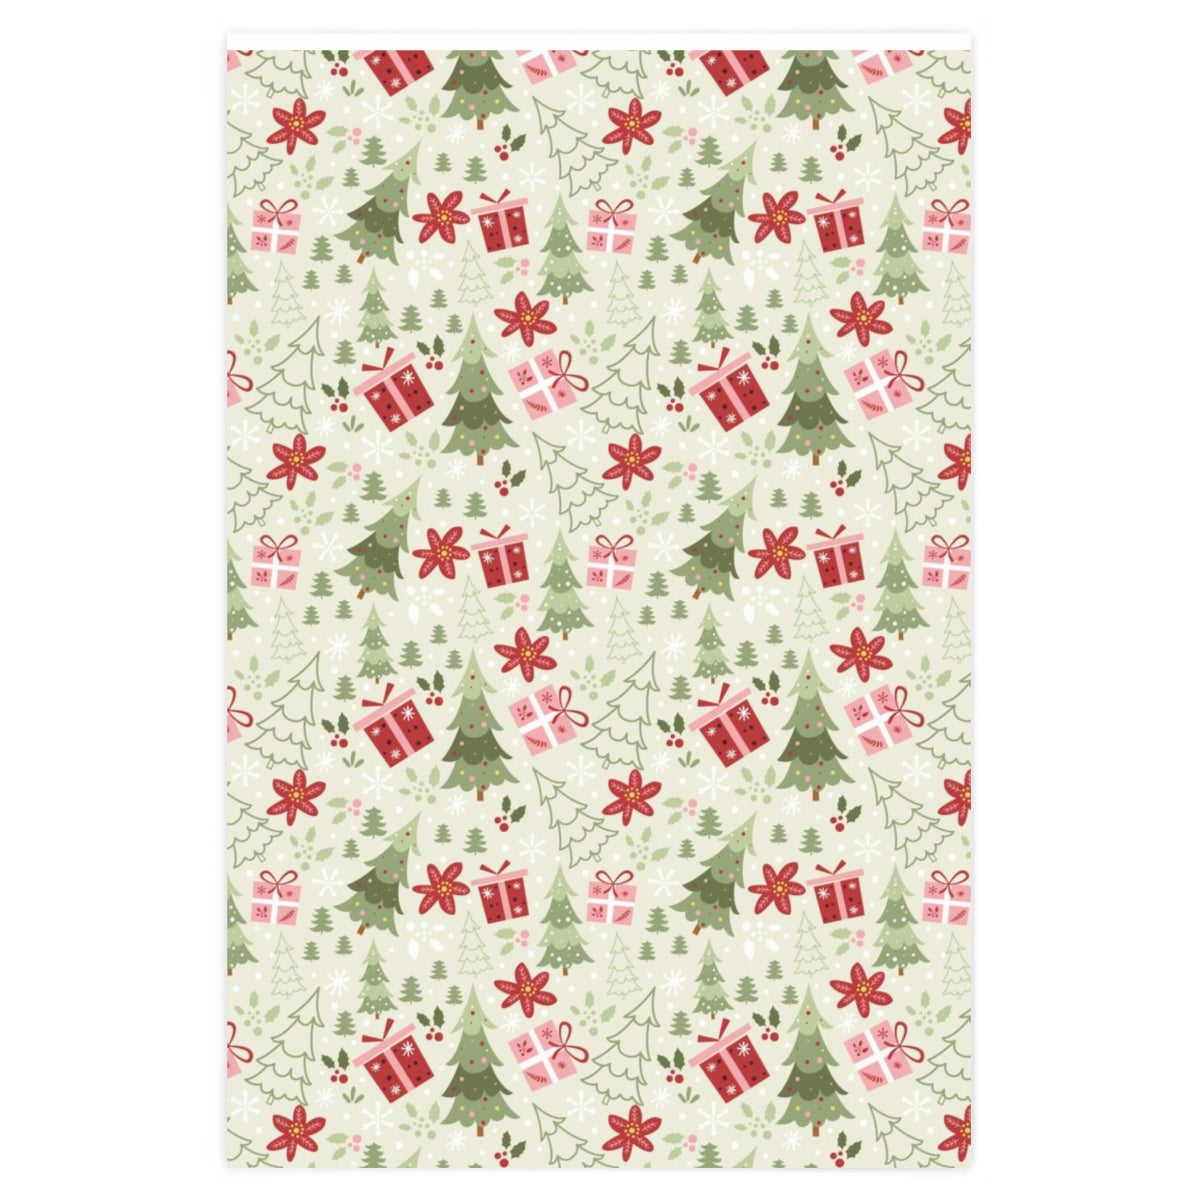 Christmas Holly 1970s Vintage Wrapping Paper Roll